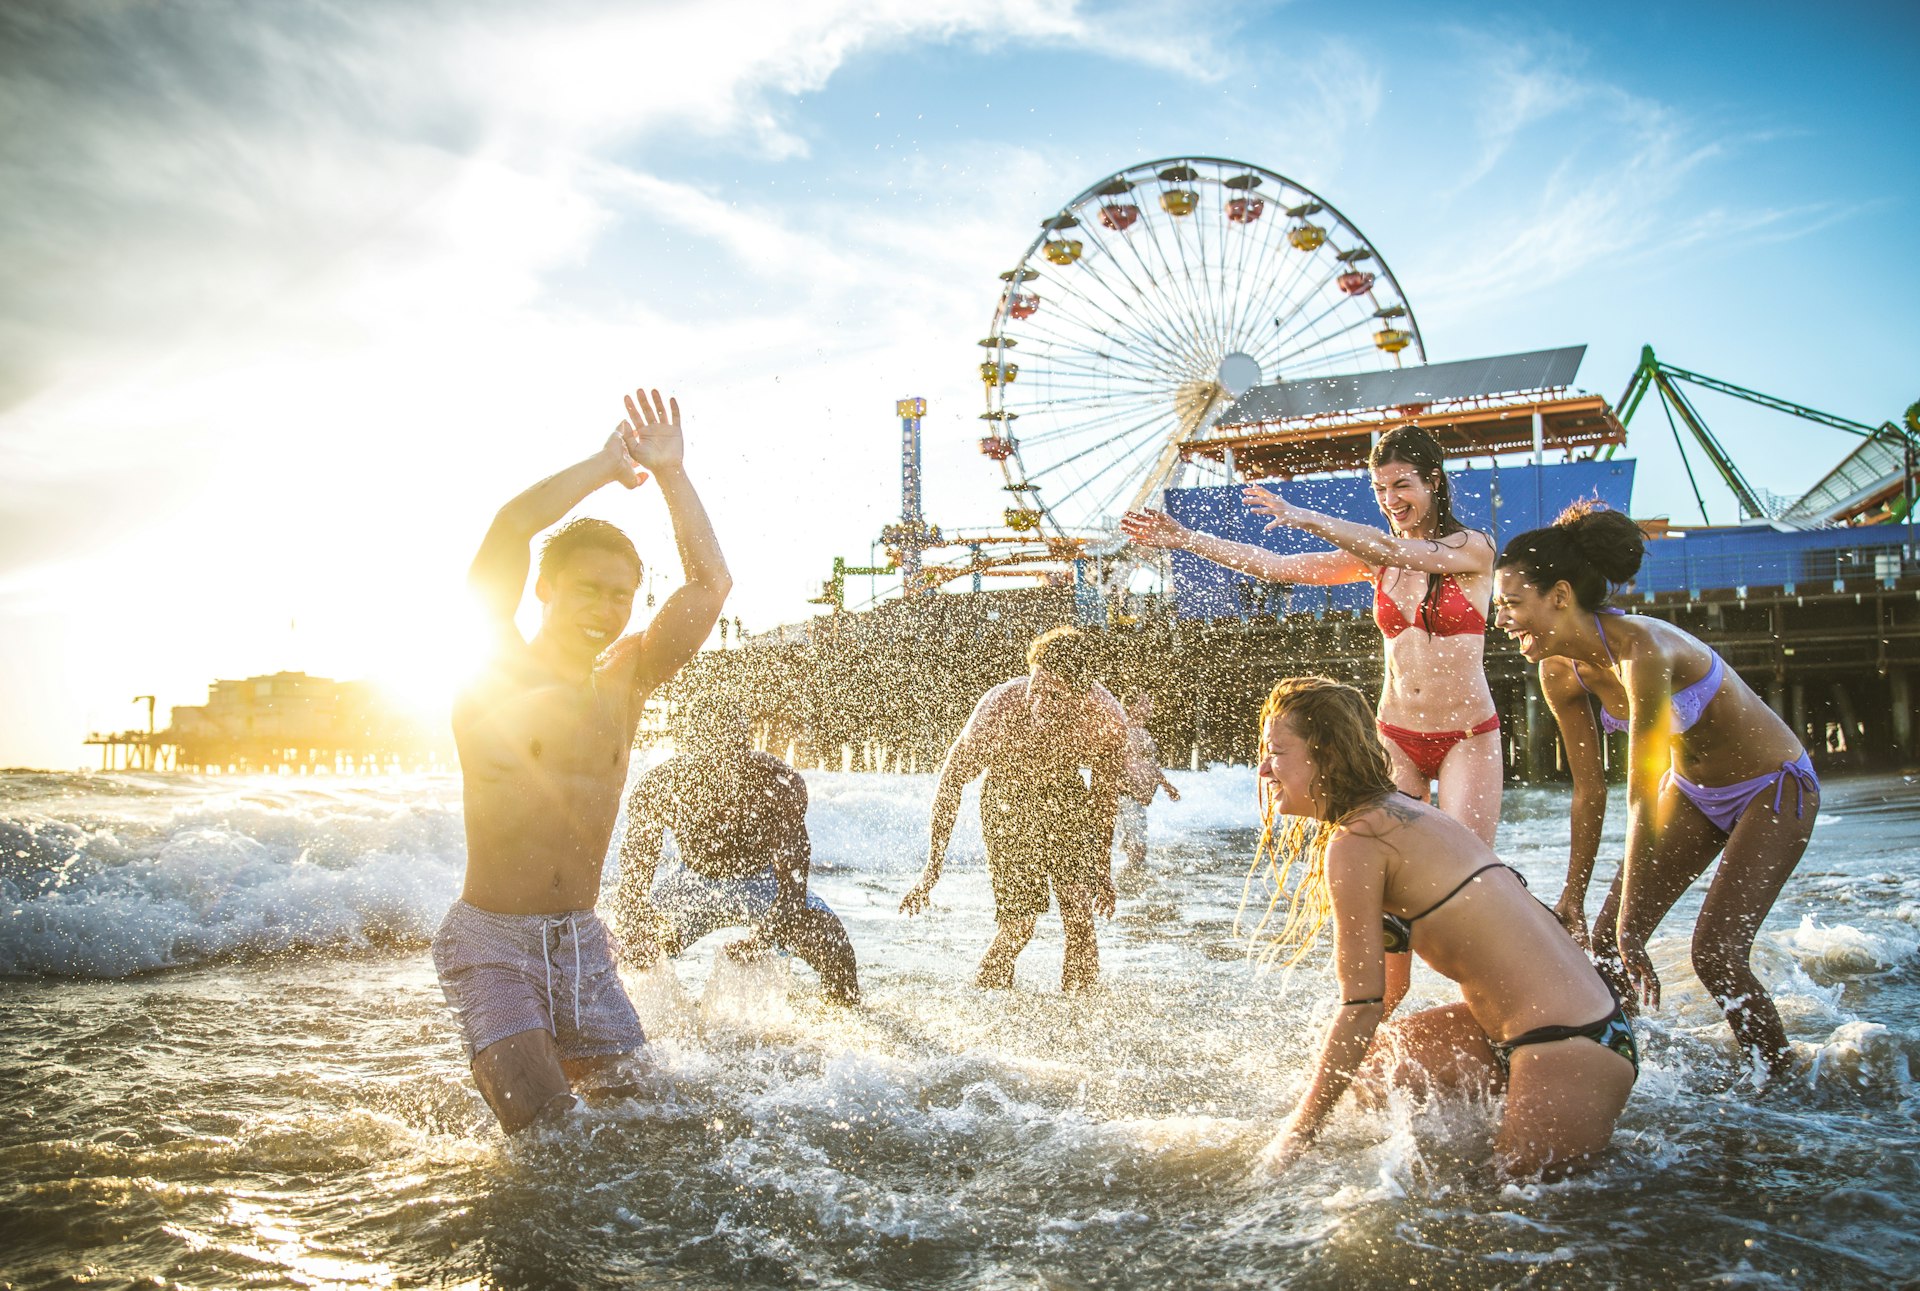 A group of friends splash in the shallow sea. Behind them is a large pier dominated by a huge Ferris wheel